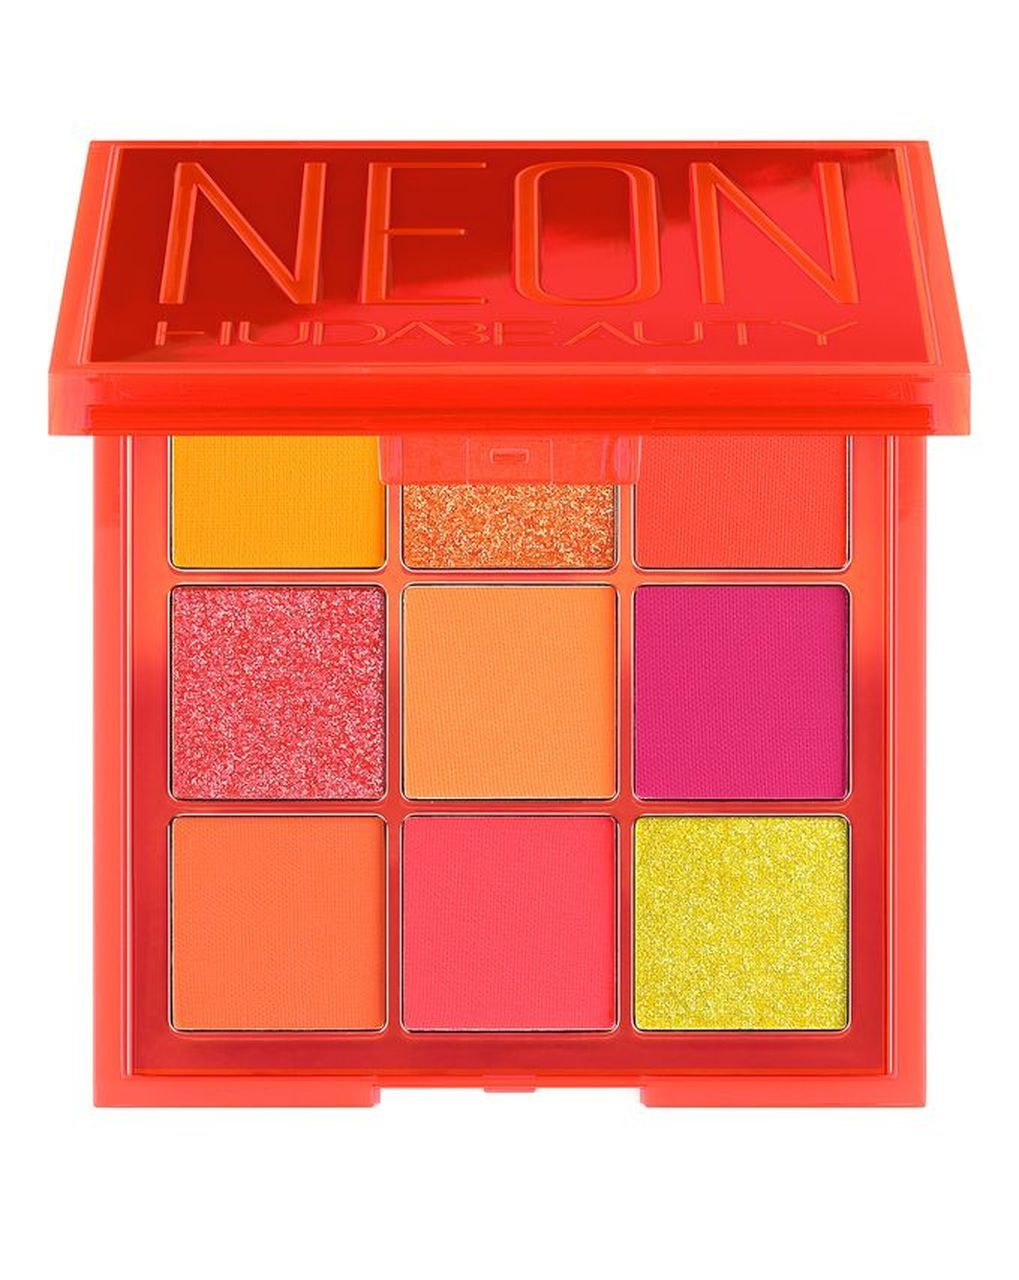 Huda makeup Neon Obsessions Palette